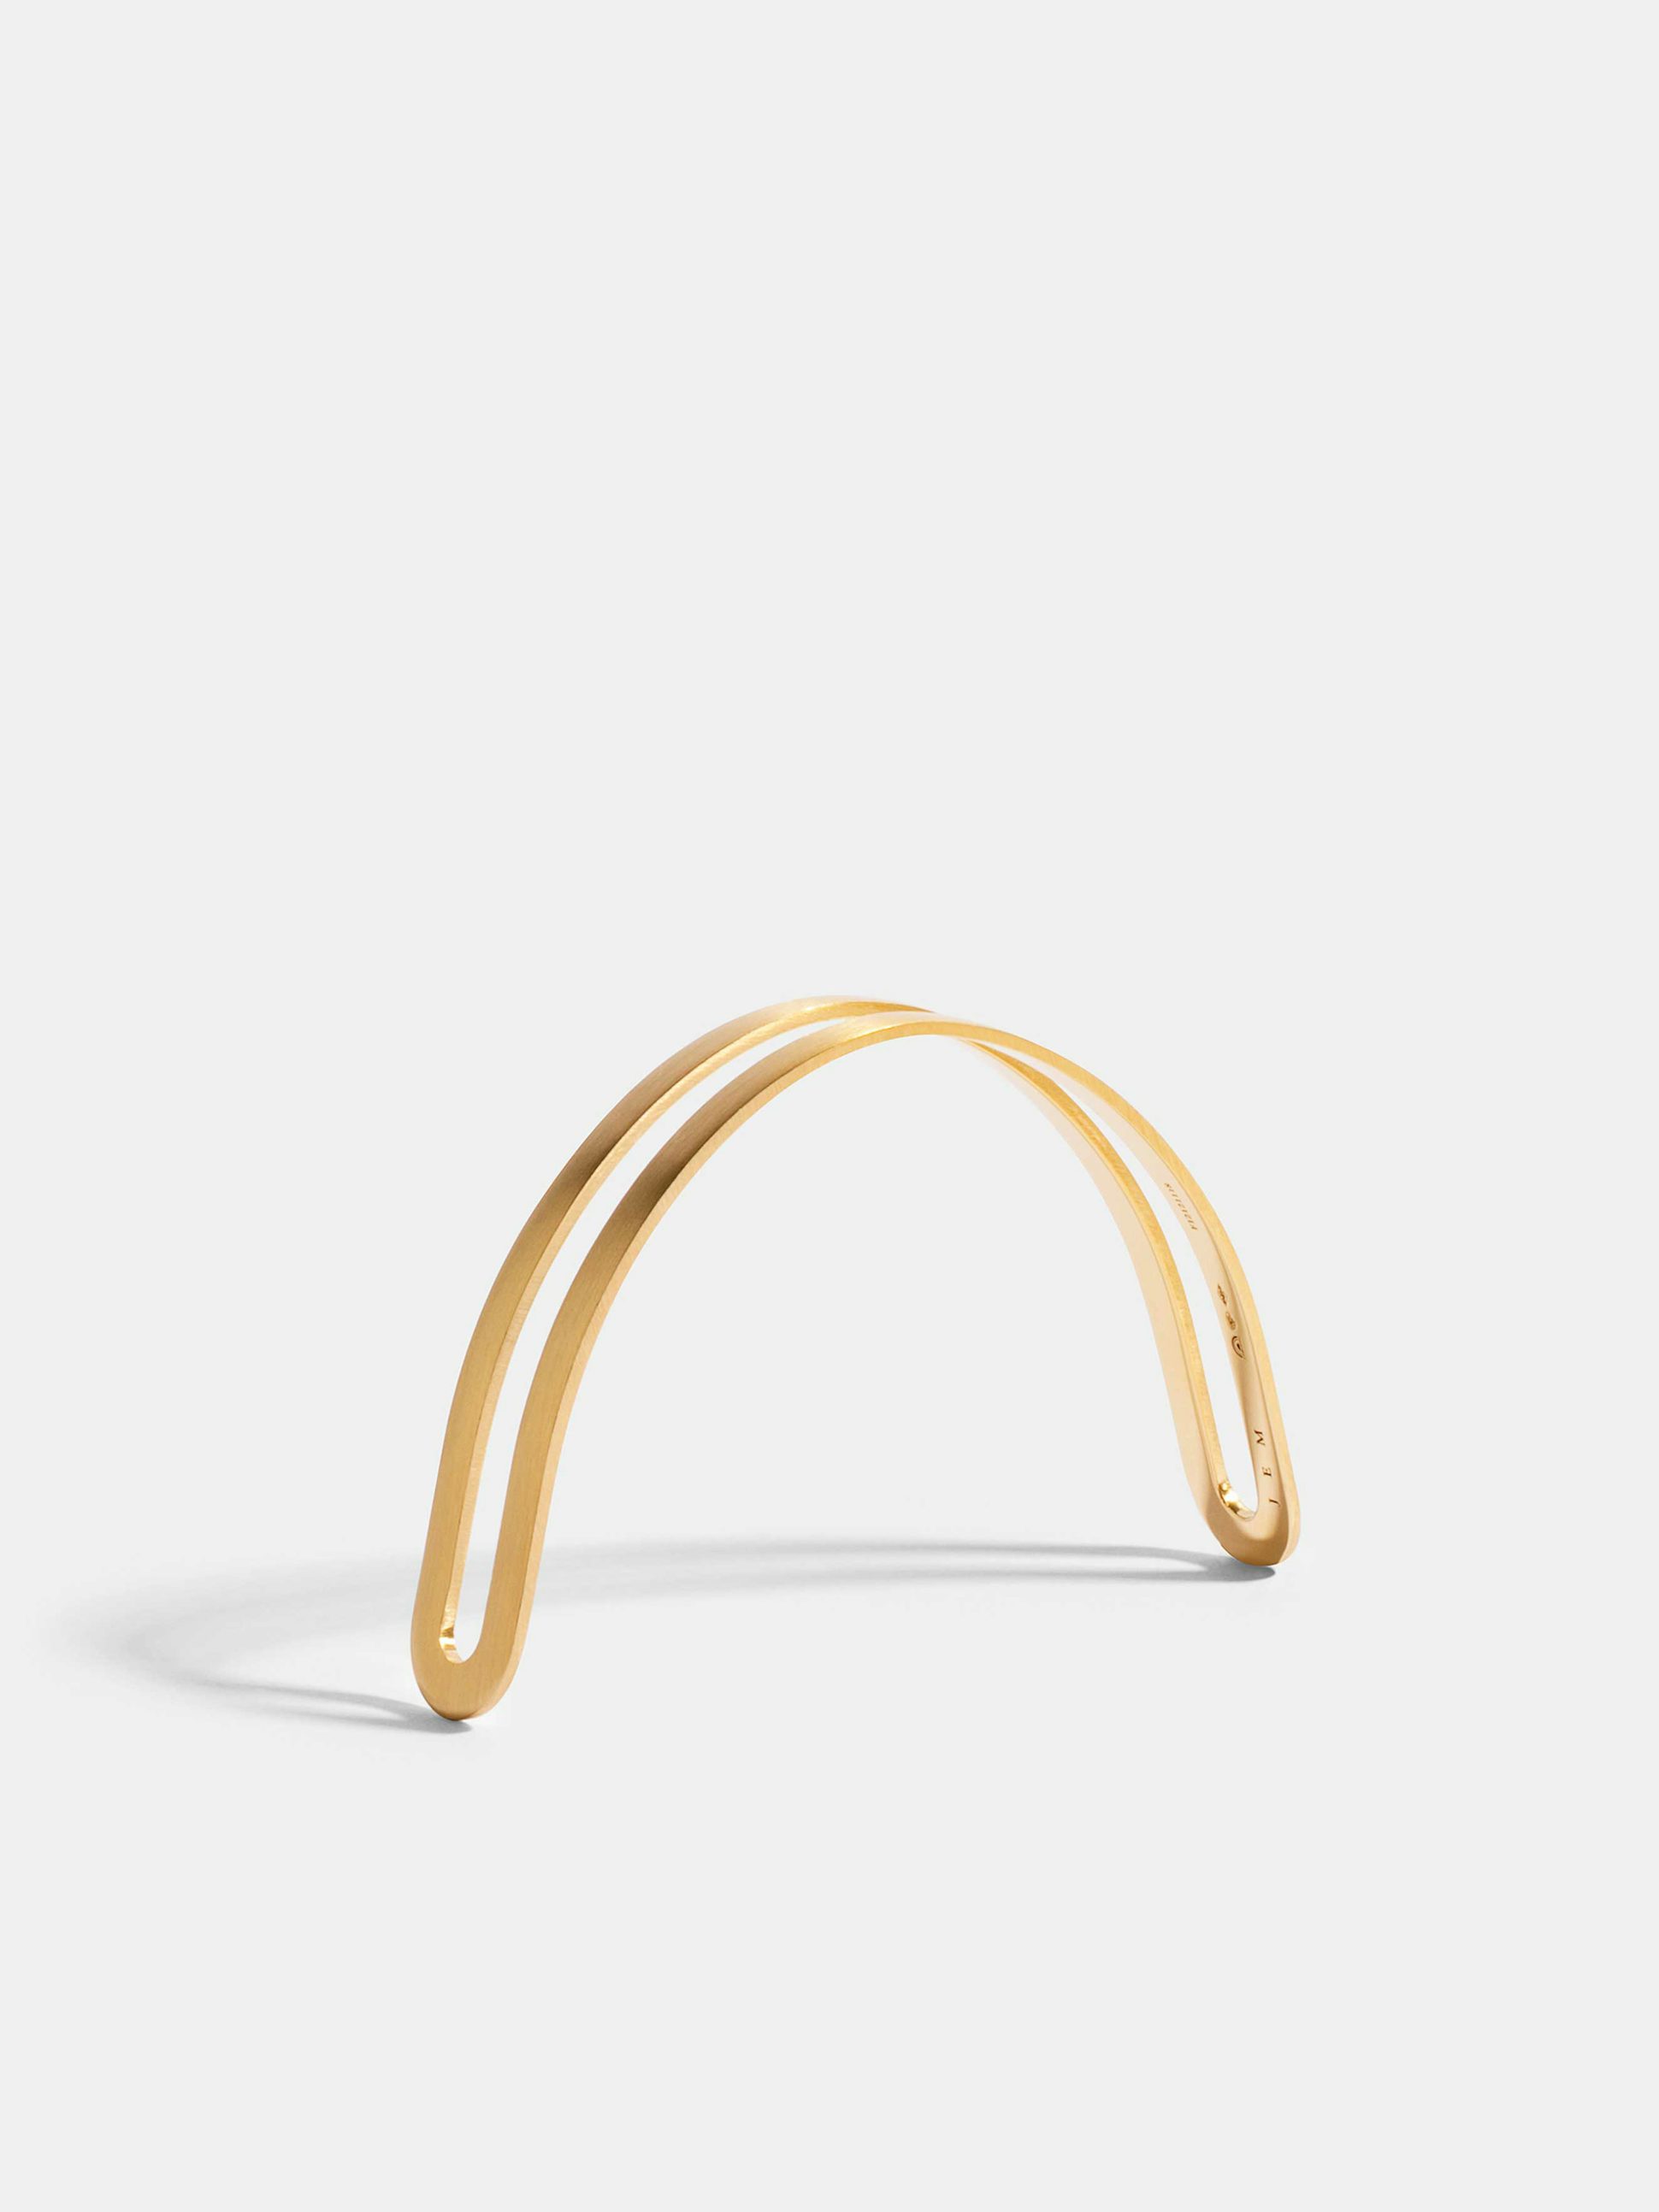 Étreintes simple half-bracelet in 18k Fairmined ethical yellow gold with a brushed finish.